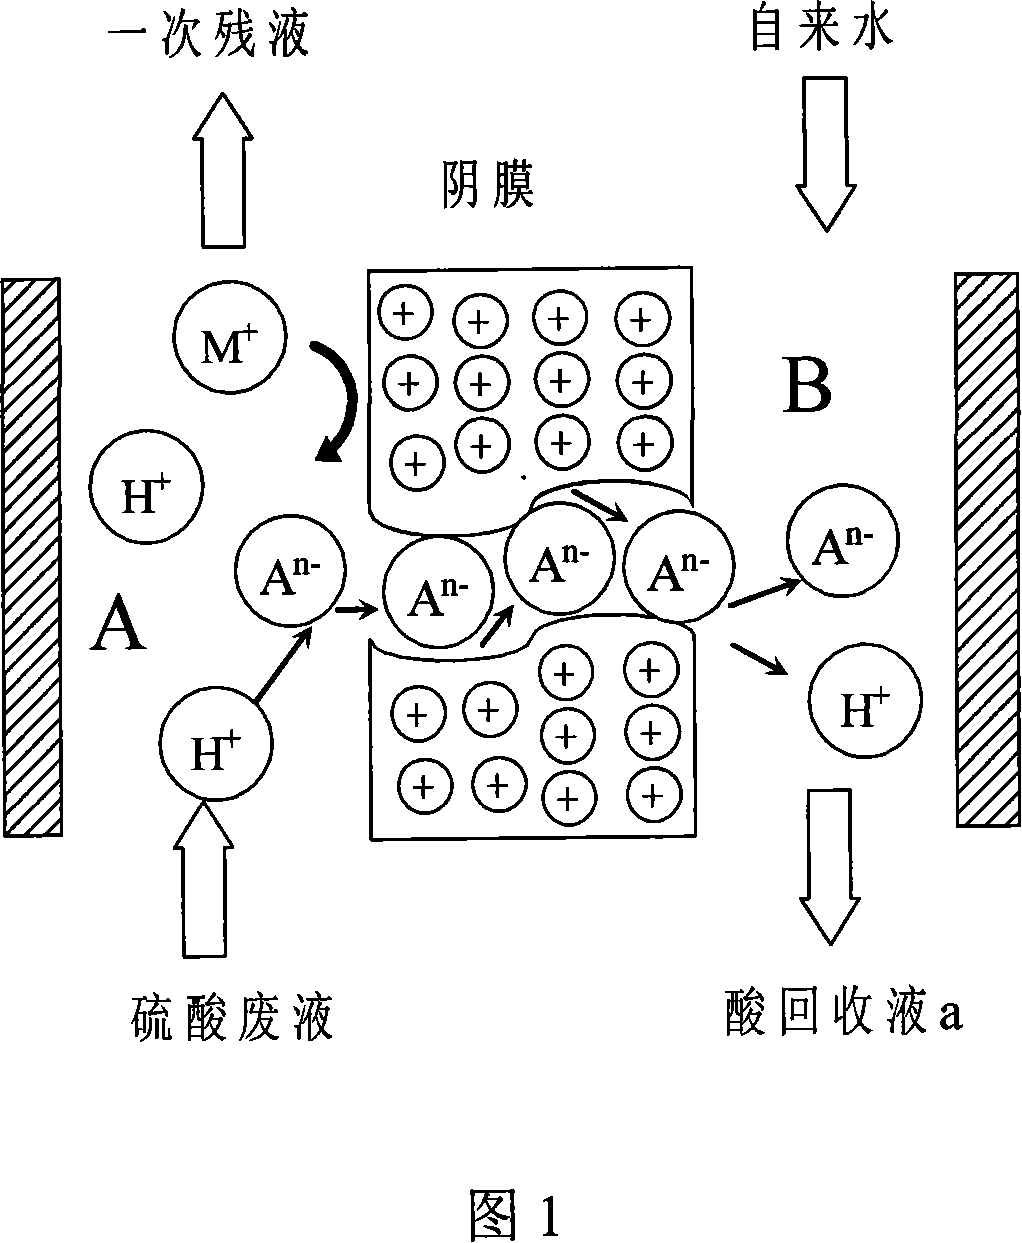 Recoverying method for sulfate in high concentration acid-containg waste liquid of battery factory